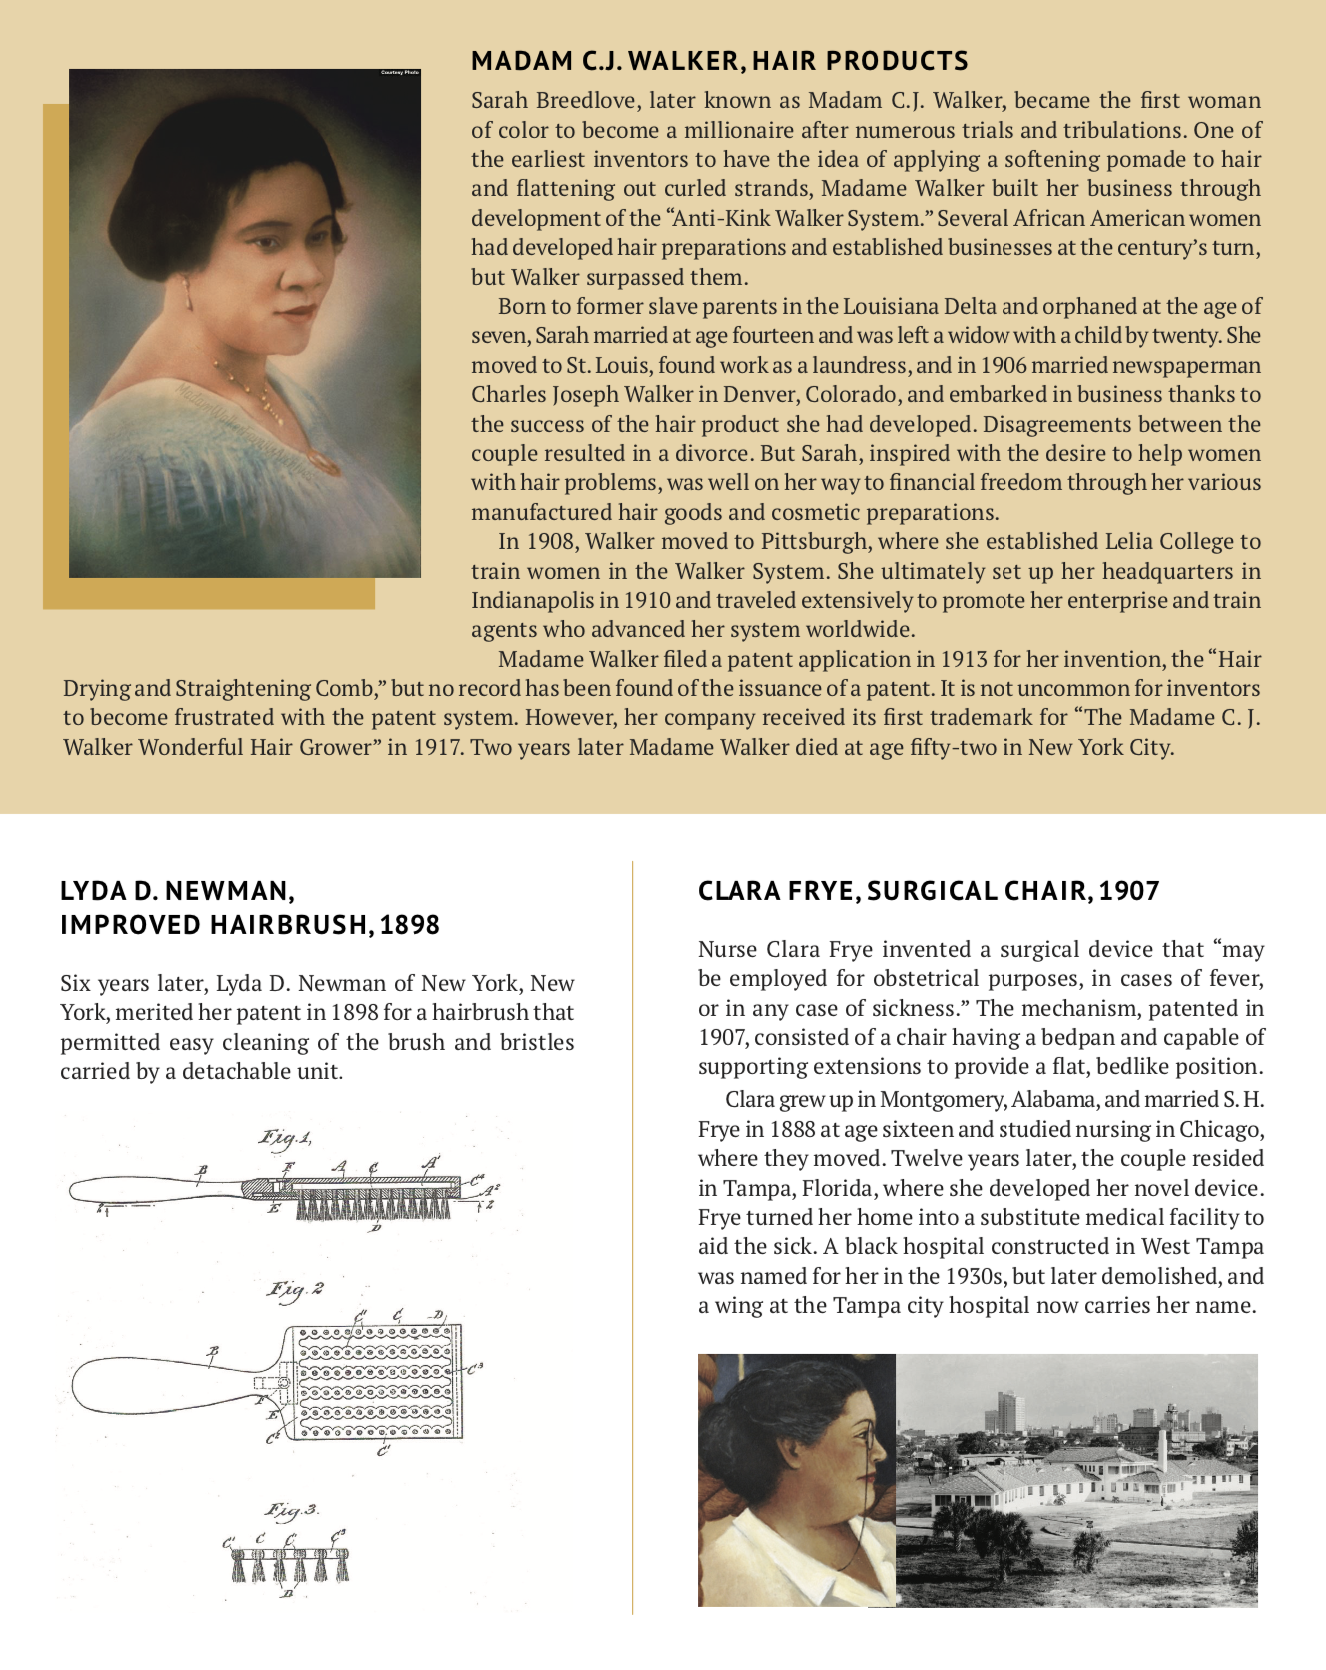 Illustrations of early women of color patent holders